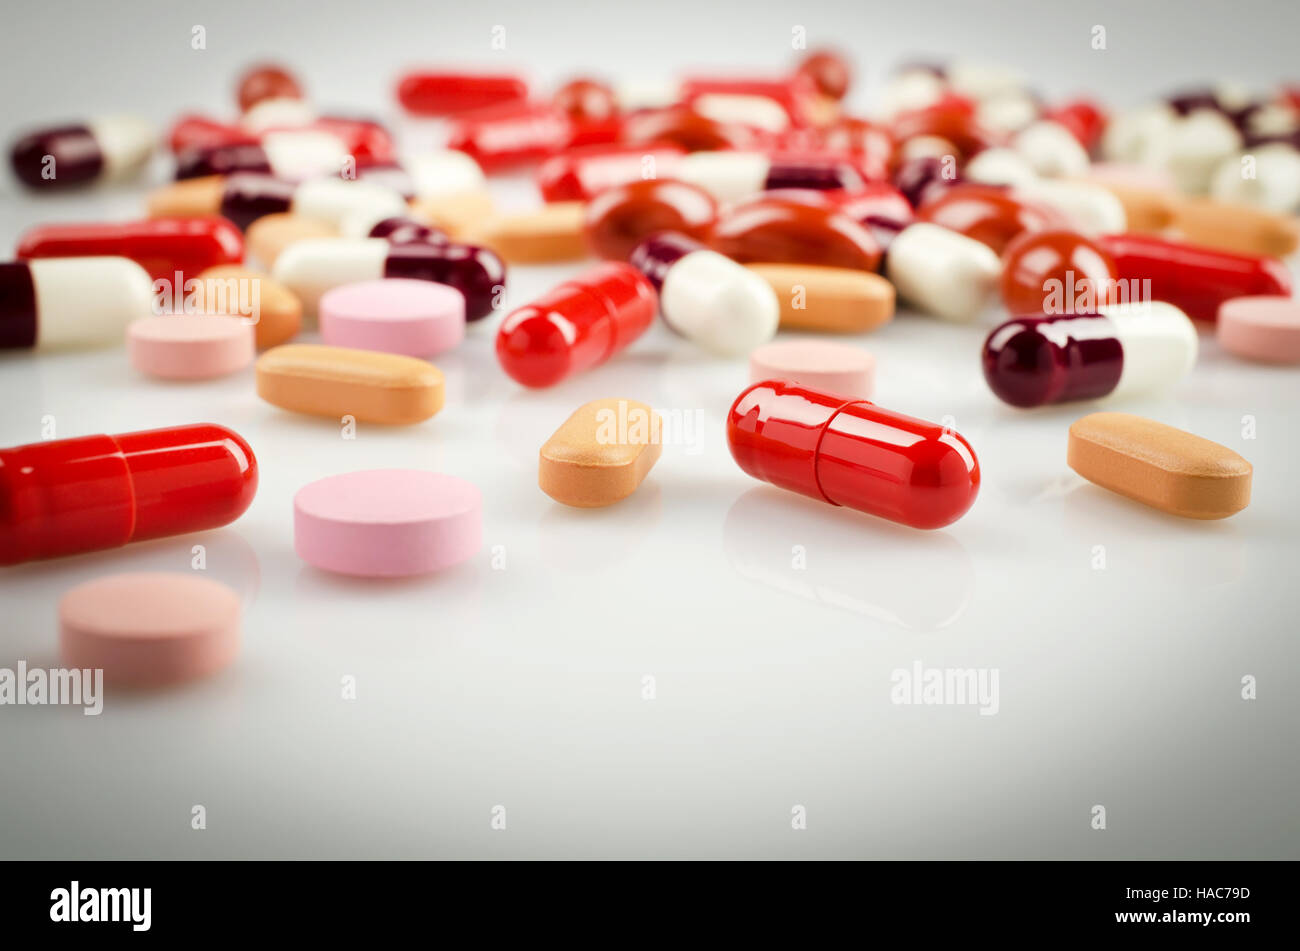 Plenty of Red and other Medical Capsules Stock Photo